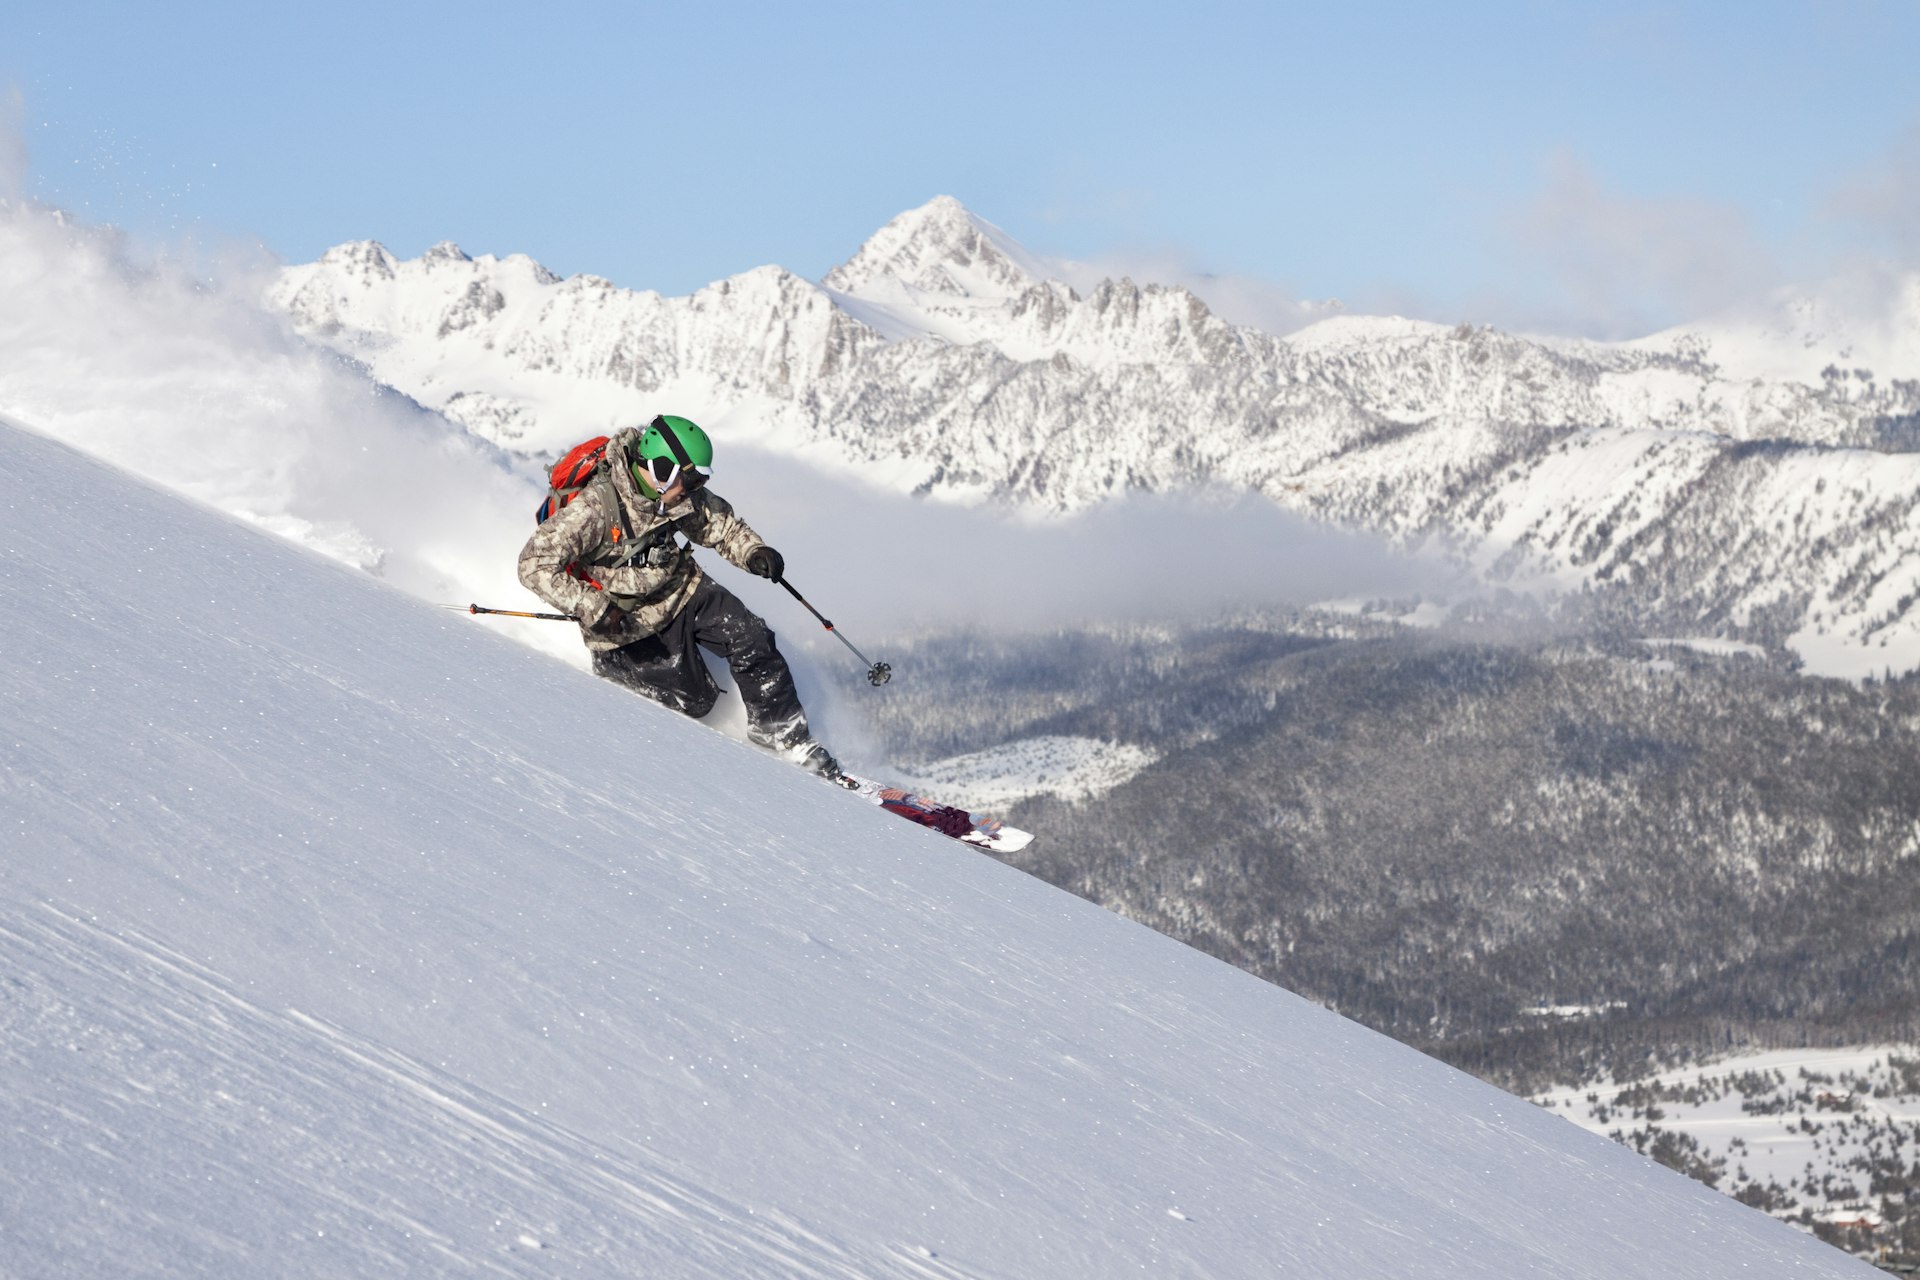 A male skier on untracked powder at Big Sky Resort, Montana